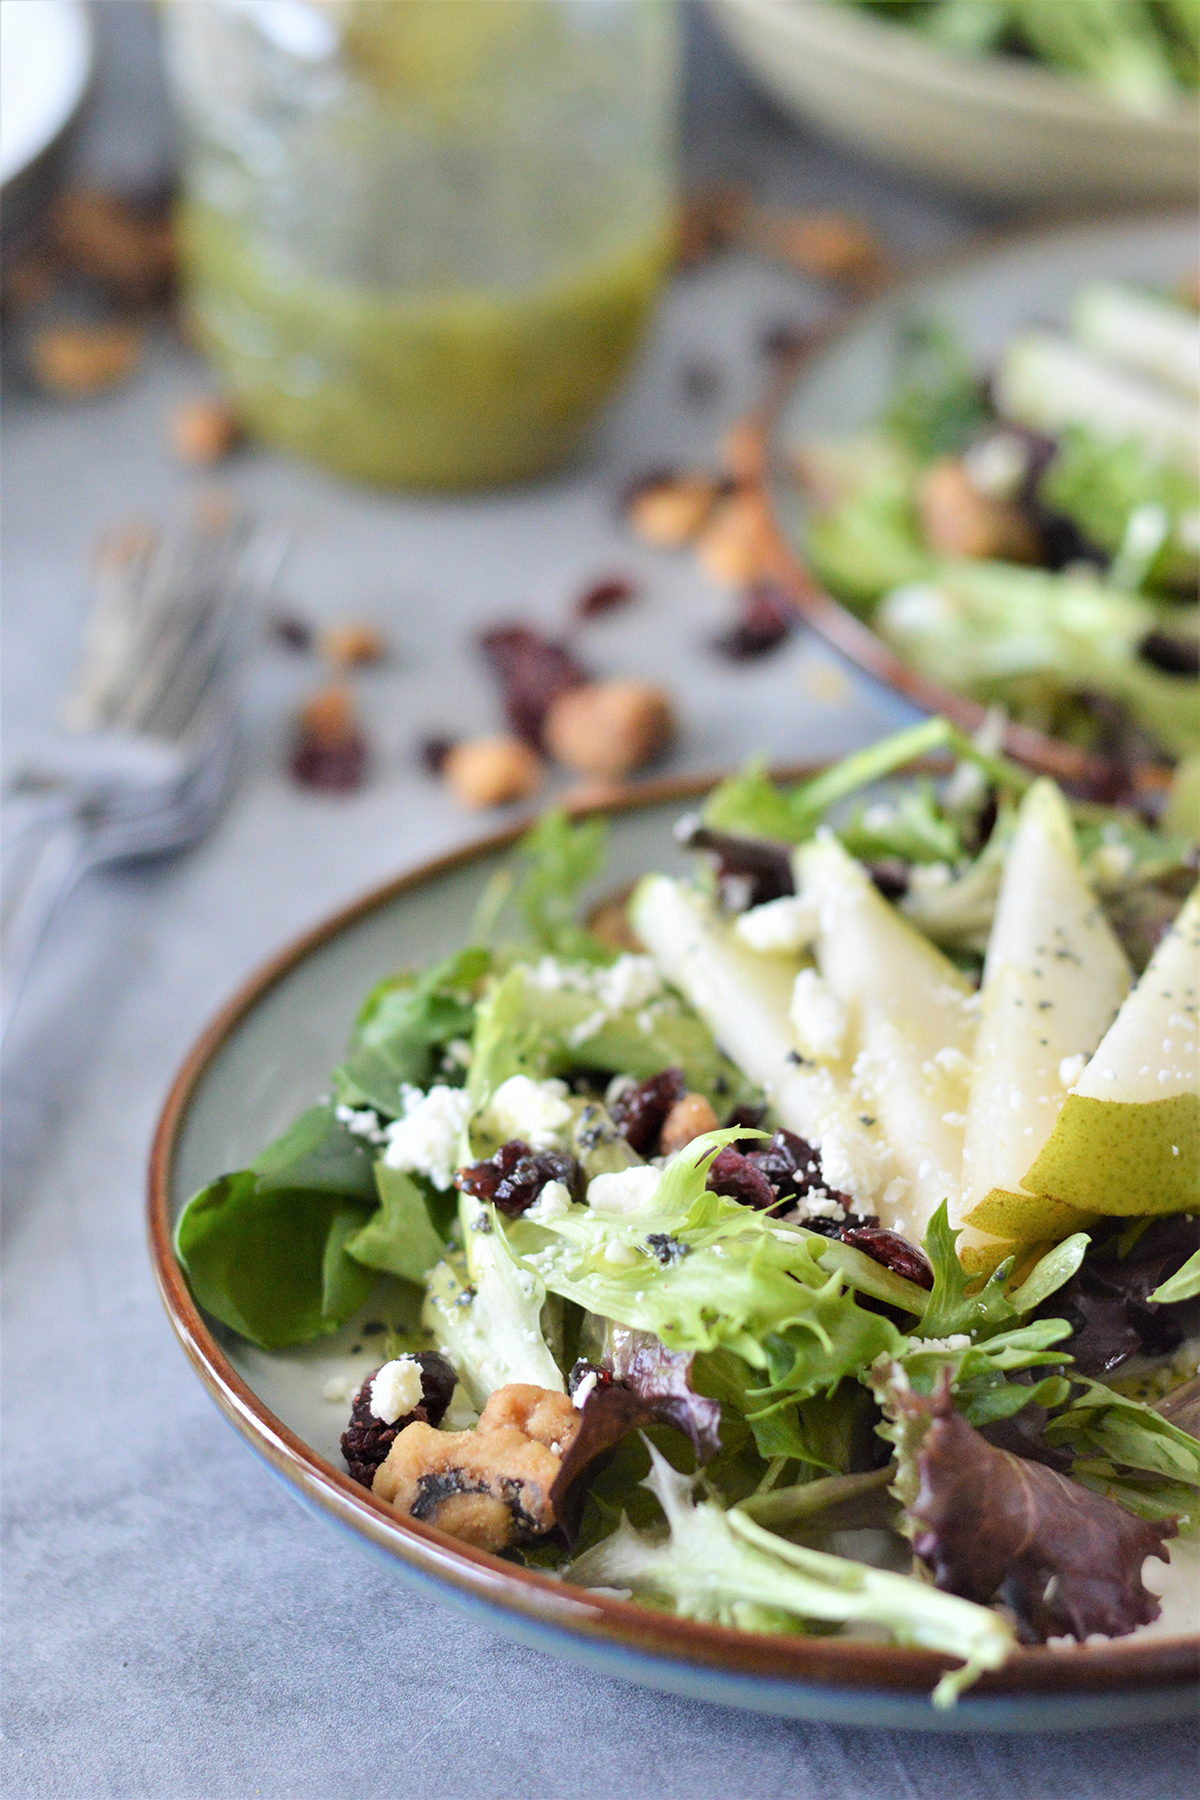 salad with sliced pears, feta cheese, candied walnuts, and cranberries on a serving plate with homemade dressing on the side